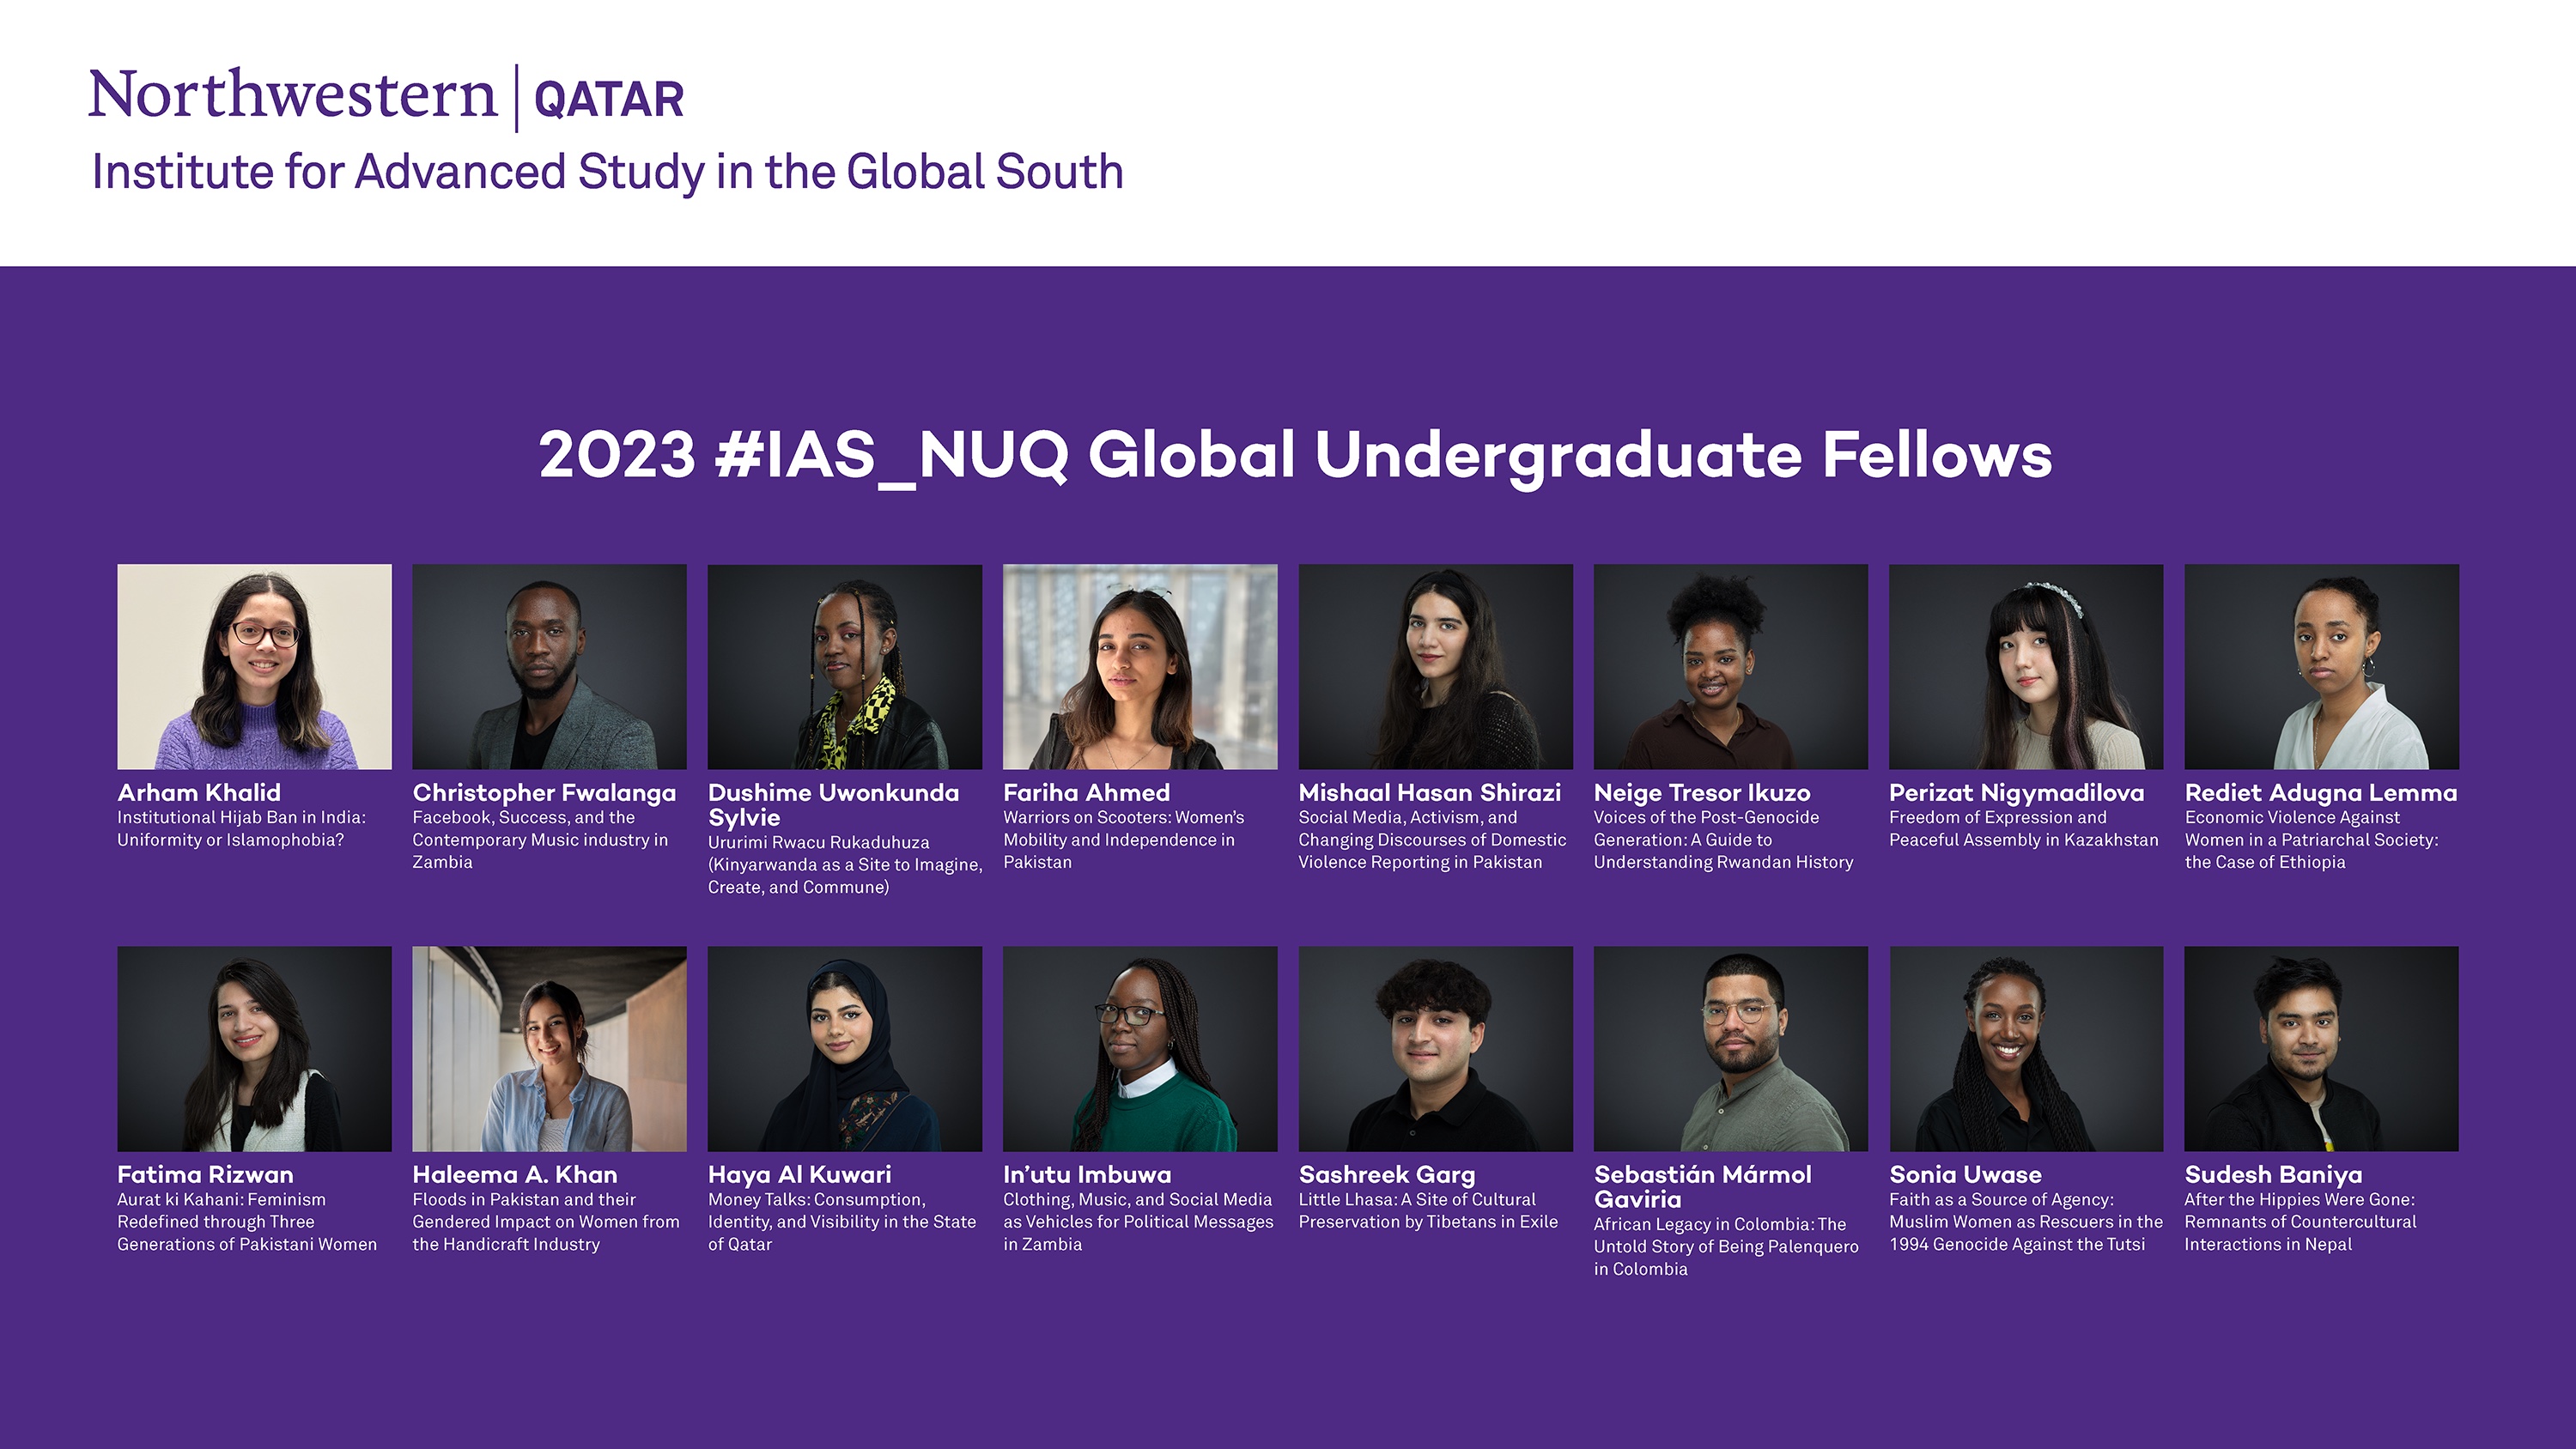 2023 #IAS_NUQ Global Undergraduate Fellows and their research topics